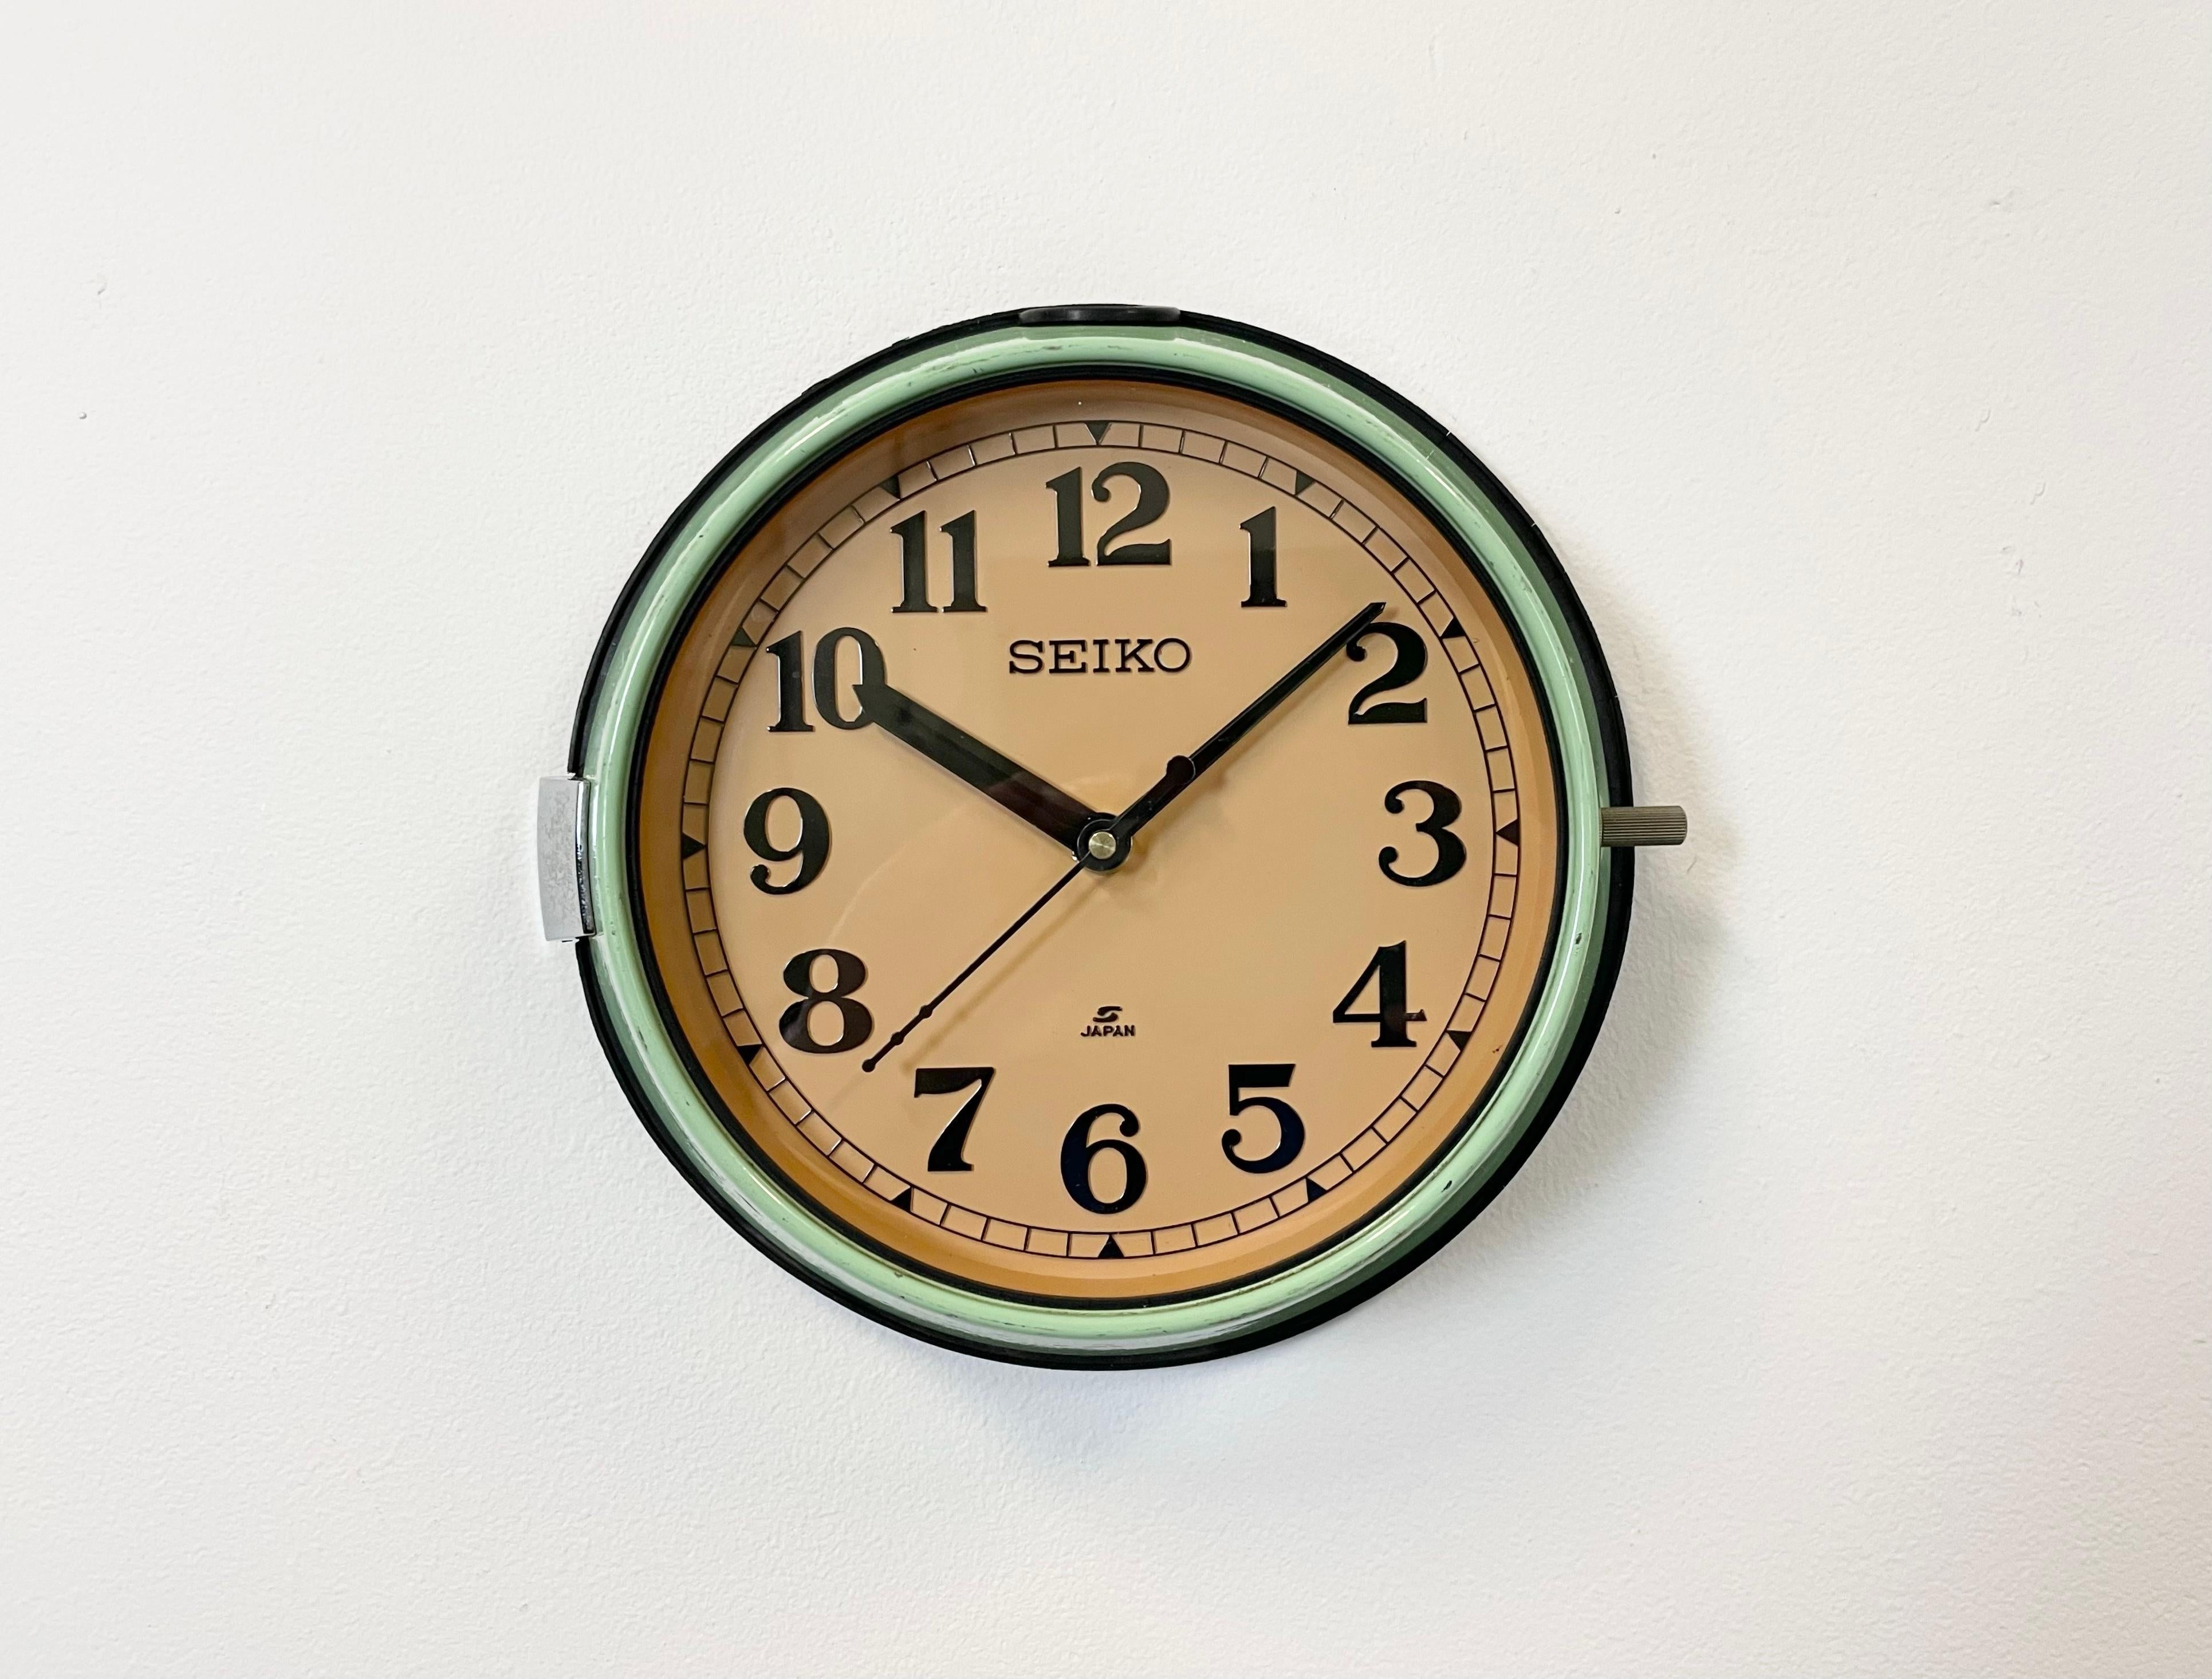 Vintage Seiko navy slave clock designed during the 1970s and produced till 1990s. These clocks were used on large Japanese tankers and cargo ships. It features a green metal frame, a plastic dial and clear glass cover. This item has been converted